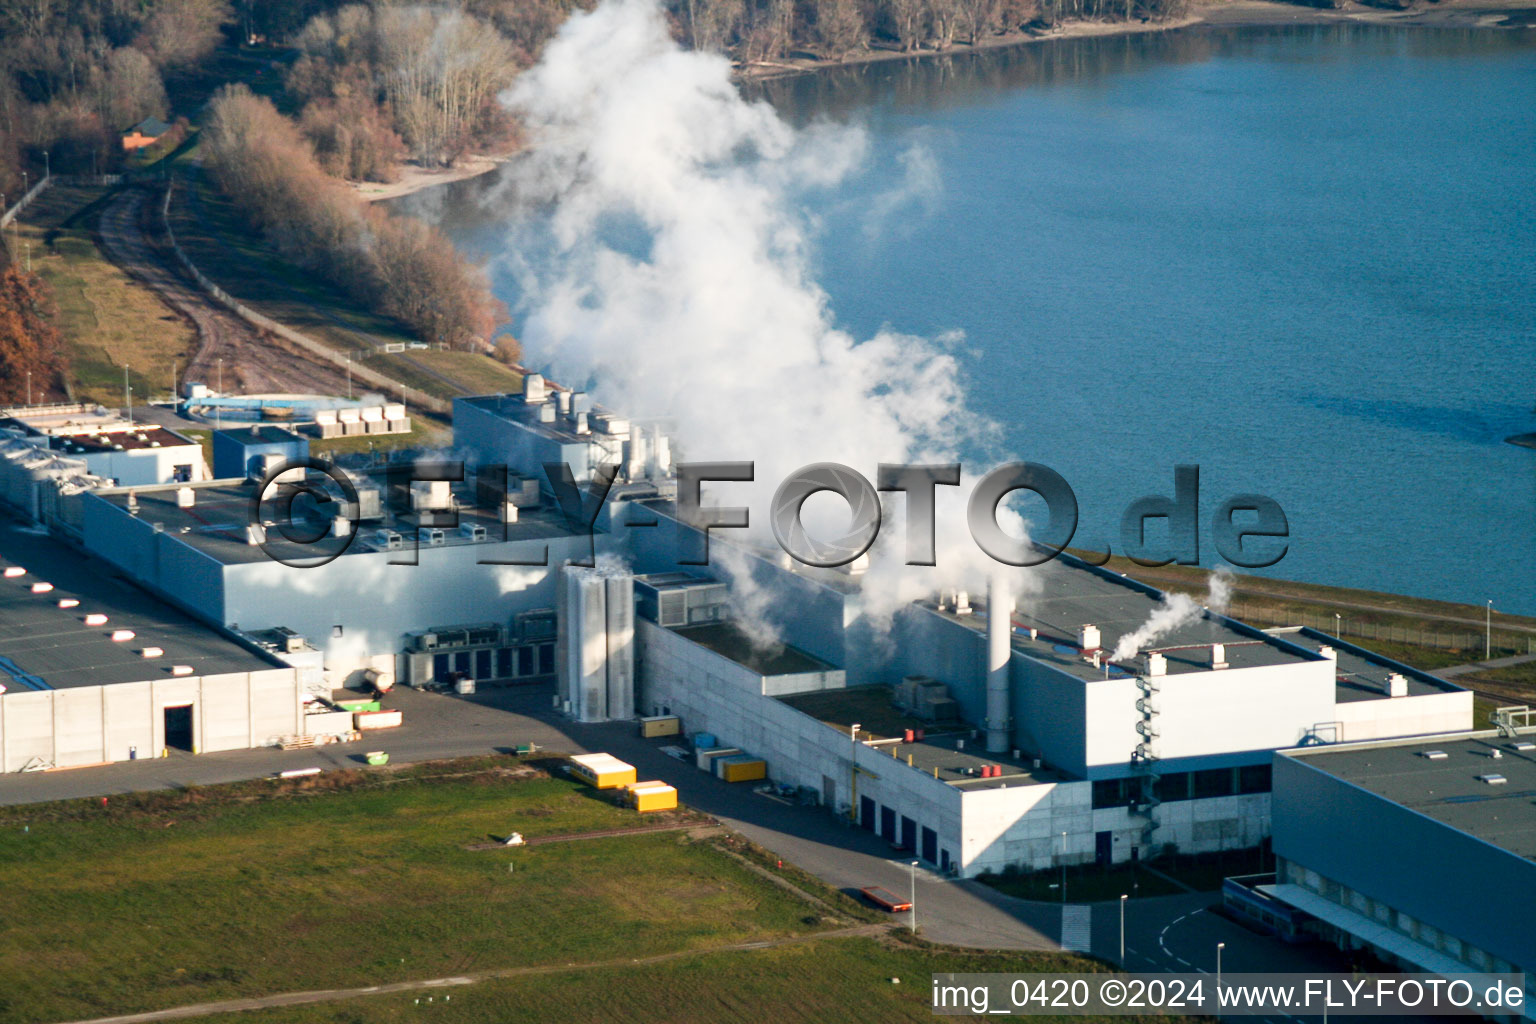 Aerial view of Palm paper factory in the Oberwald industrial area in Wörth am Rhein in the state Rhineland-Palatinate, Germany